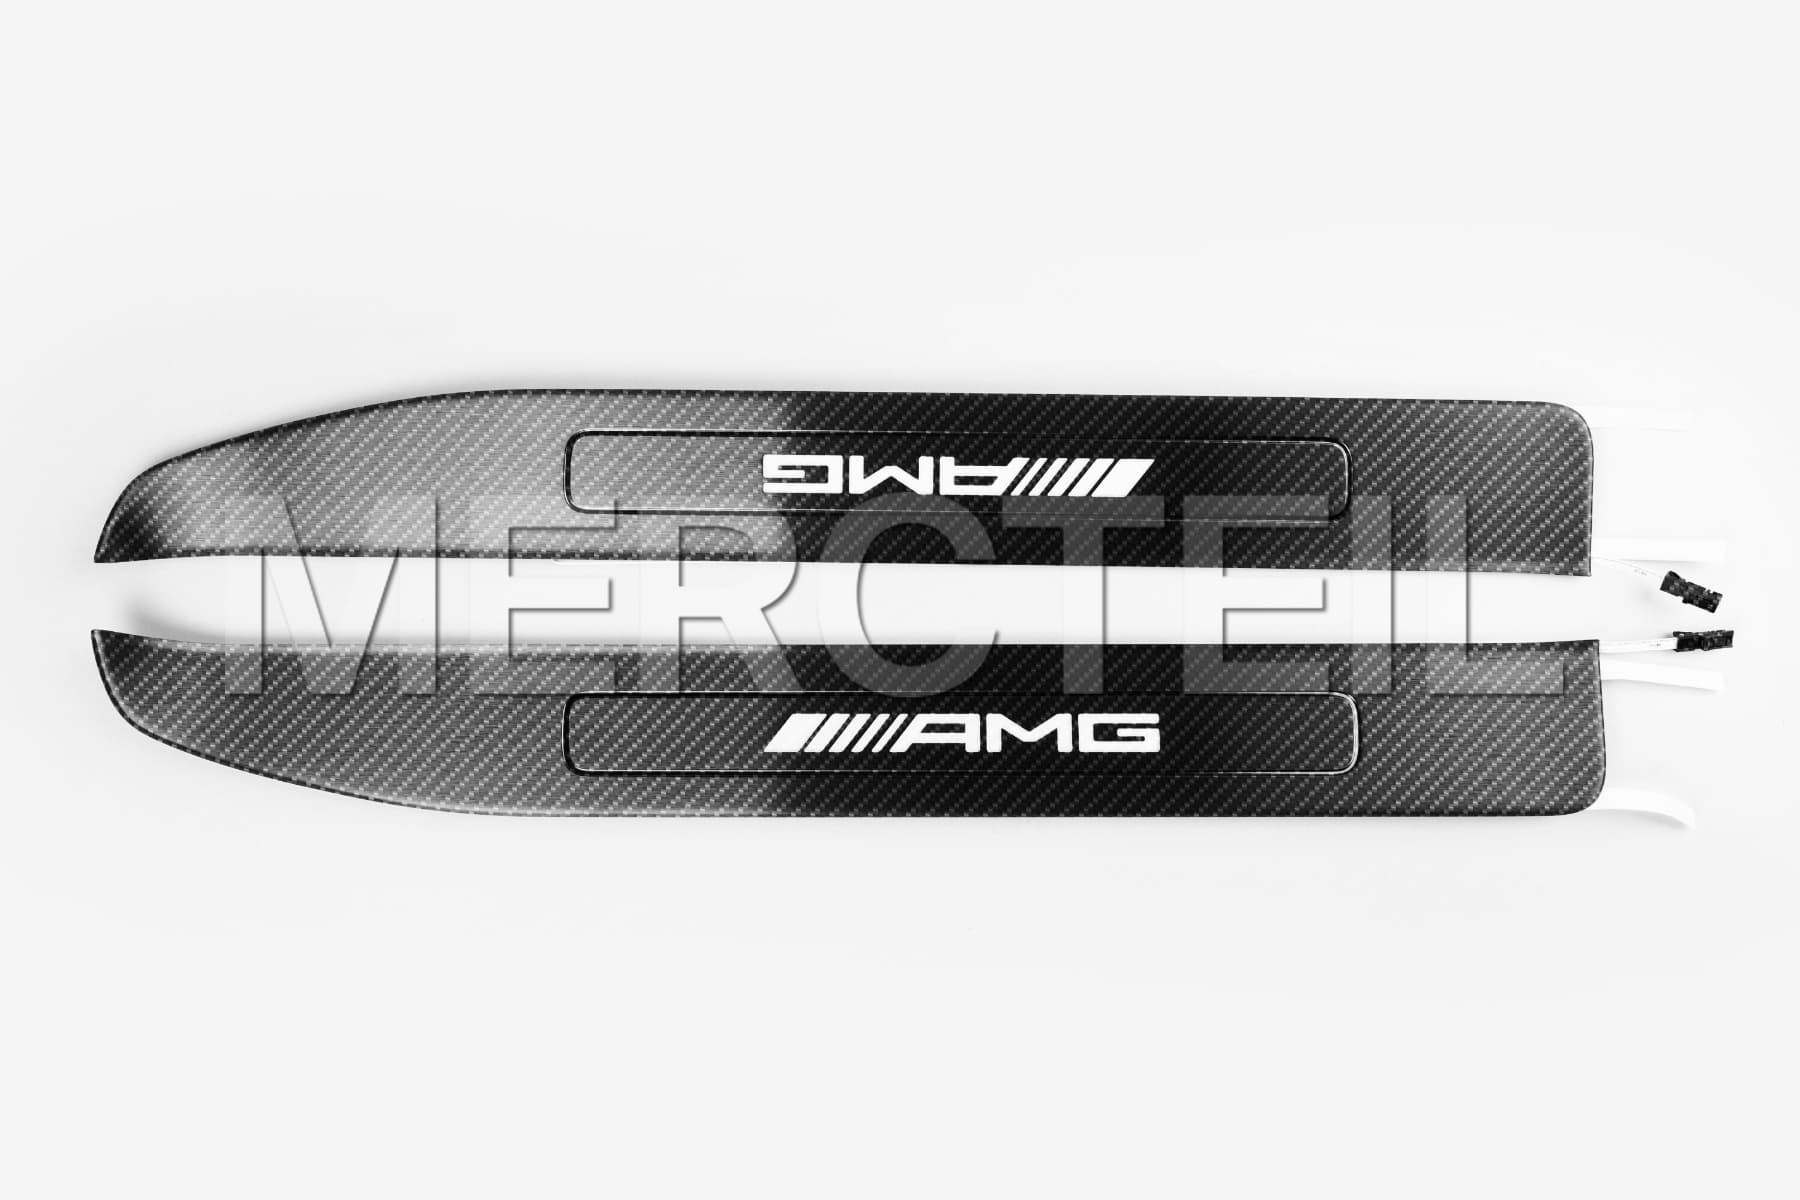 AMG GT Carbon Illuminated Door Sills Kit A/C190 Genuine Mercedes-AMG (Part number: A1976840921)